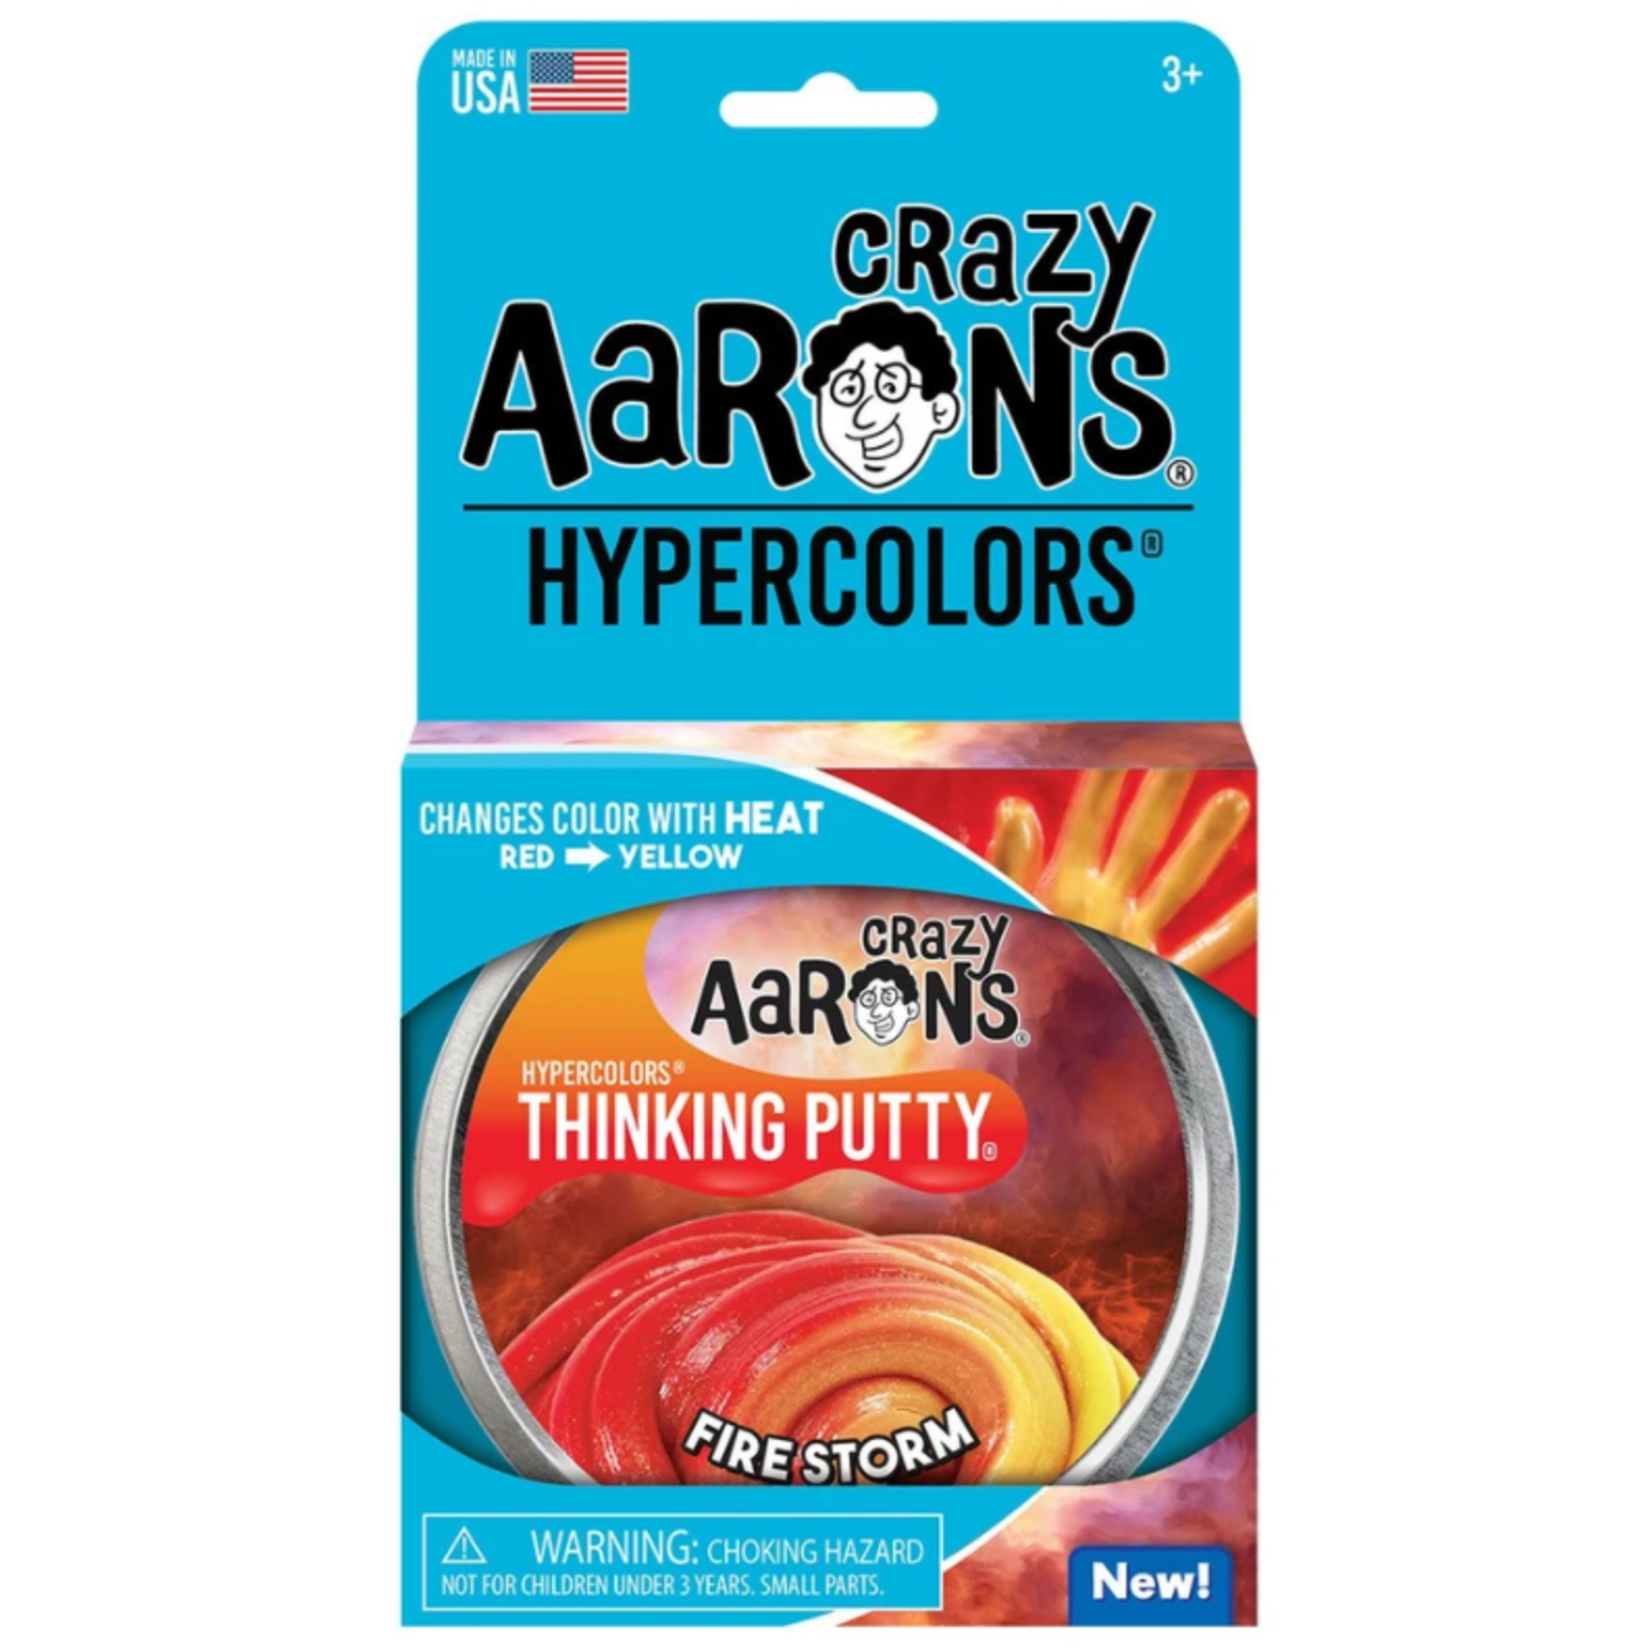 Crazy Aaron's Thinking Putty Fire Storm Thinking Putty